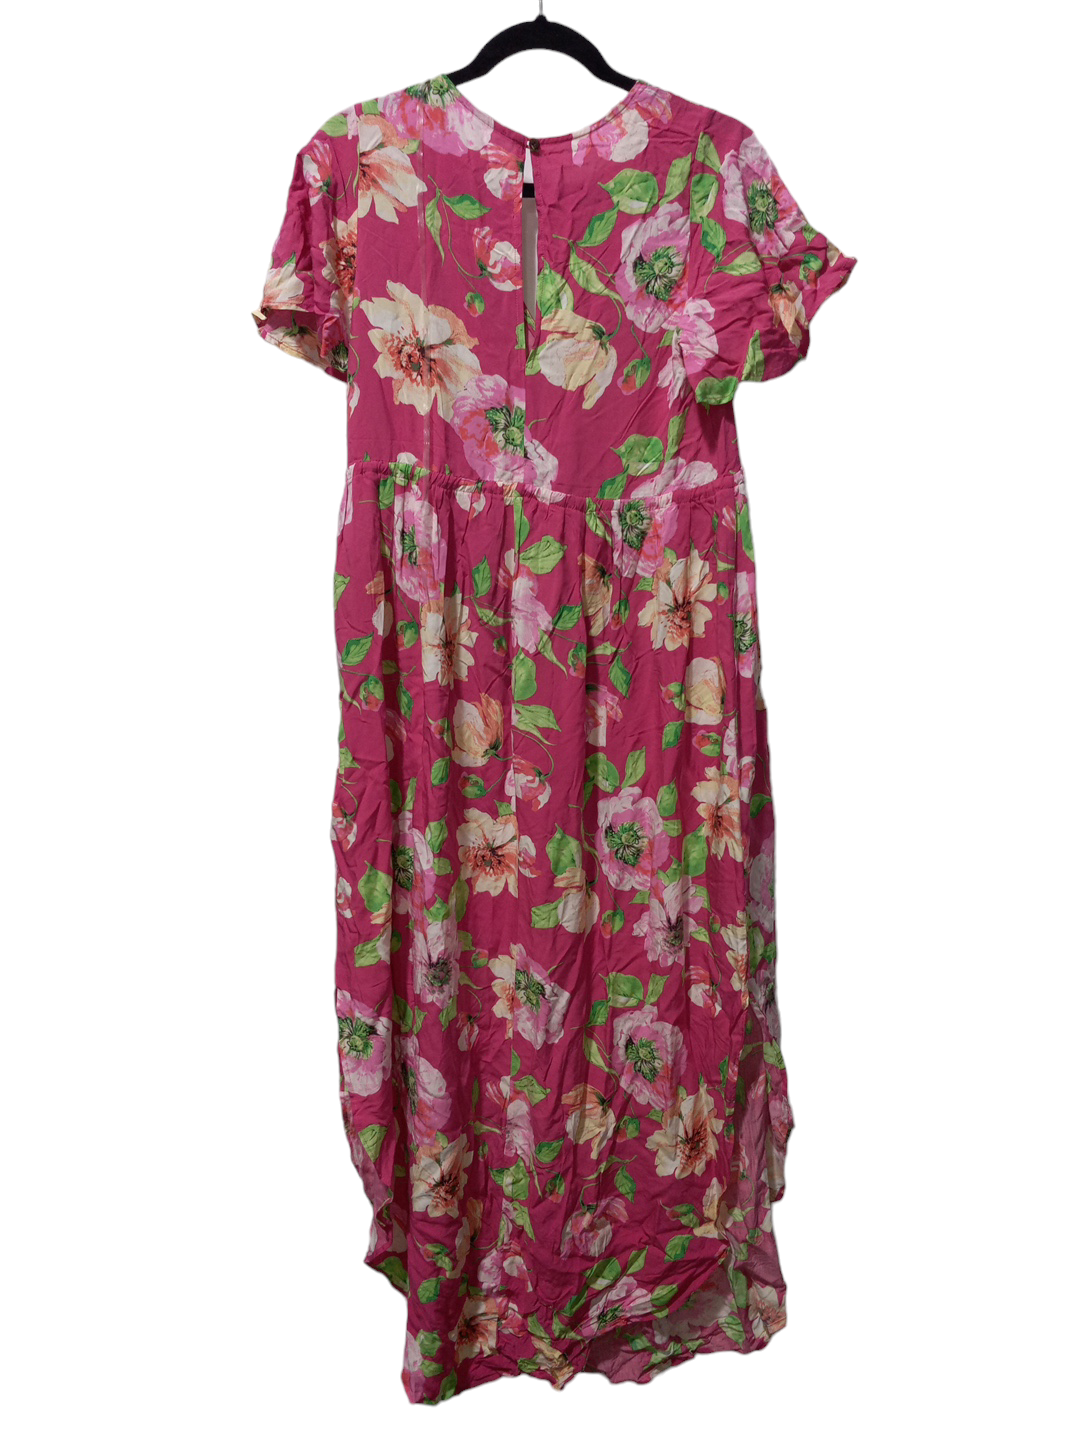 Floral Print Dress Casual Maxi Easel, Size S